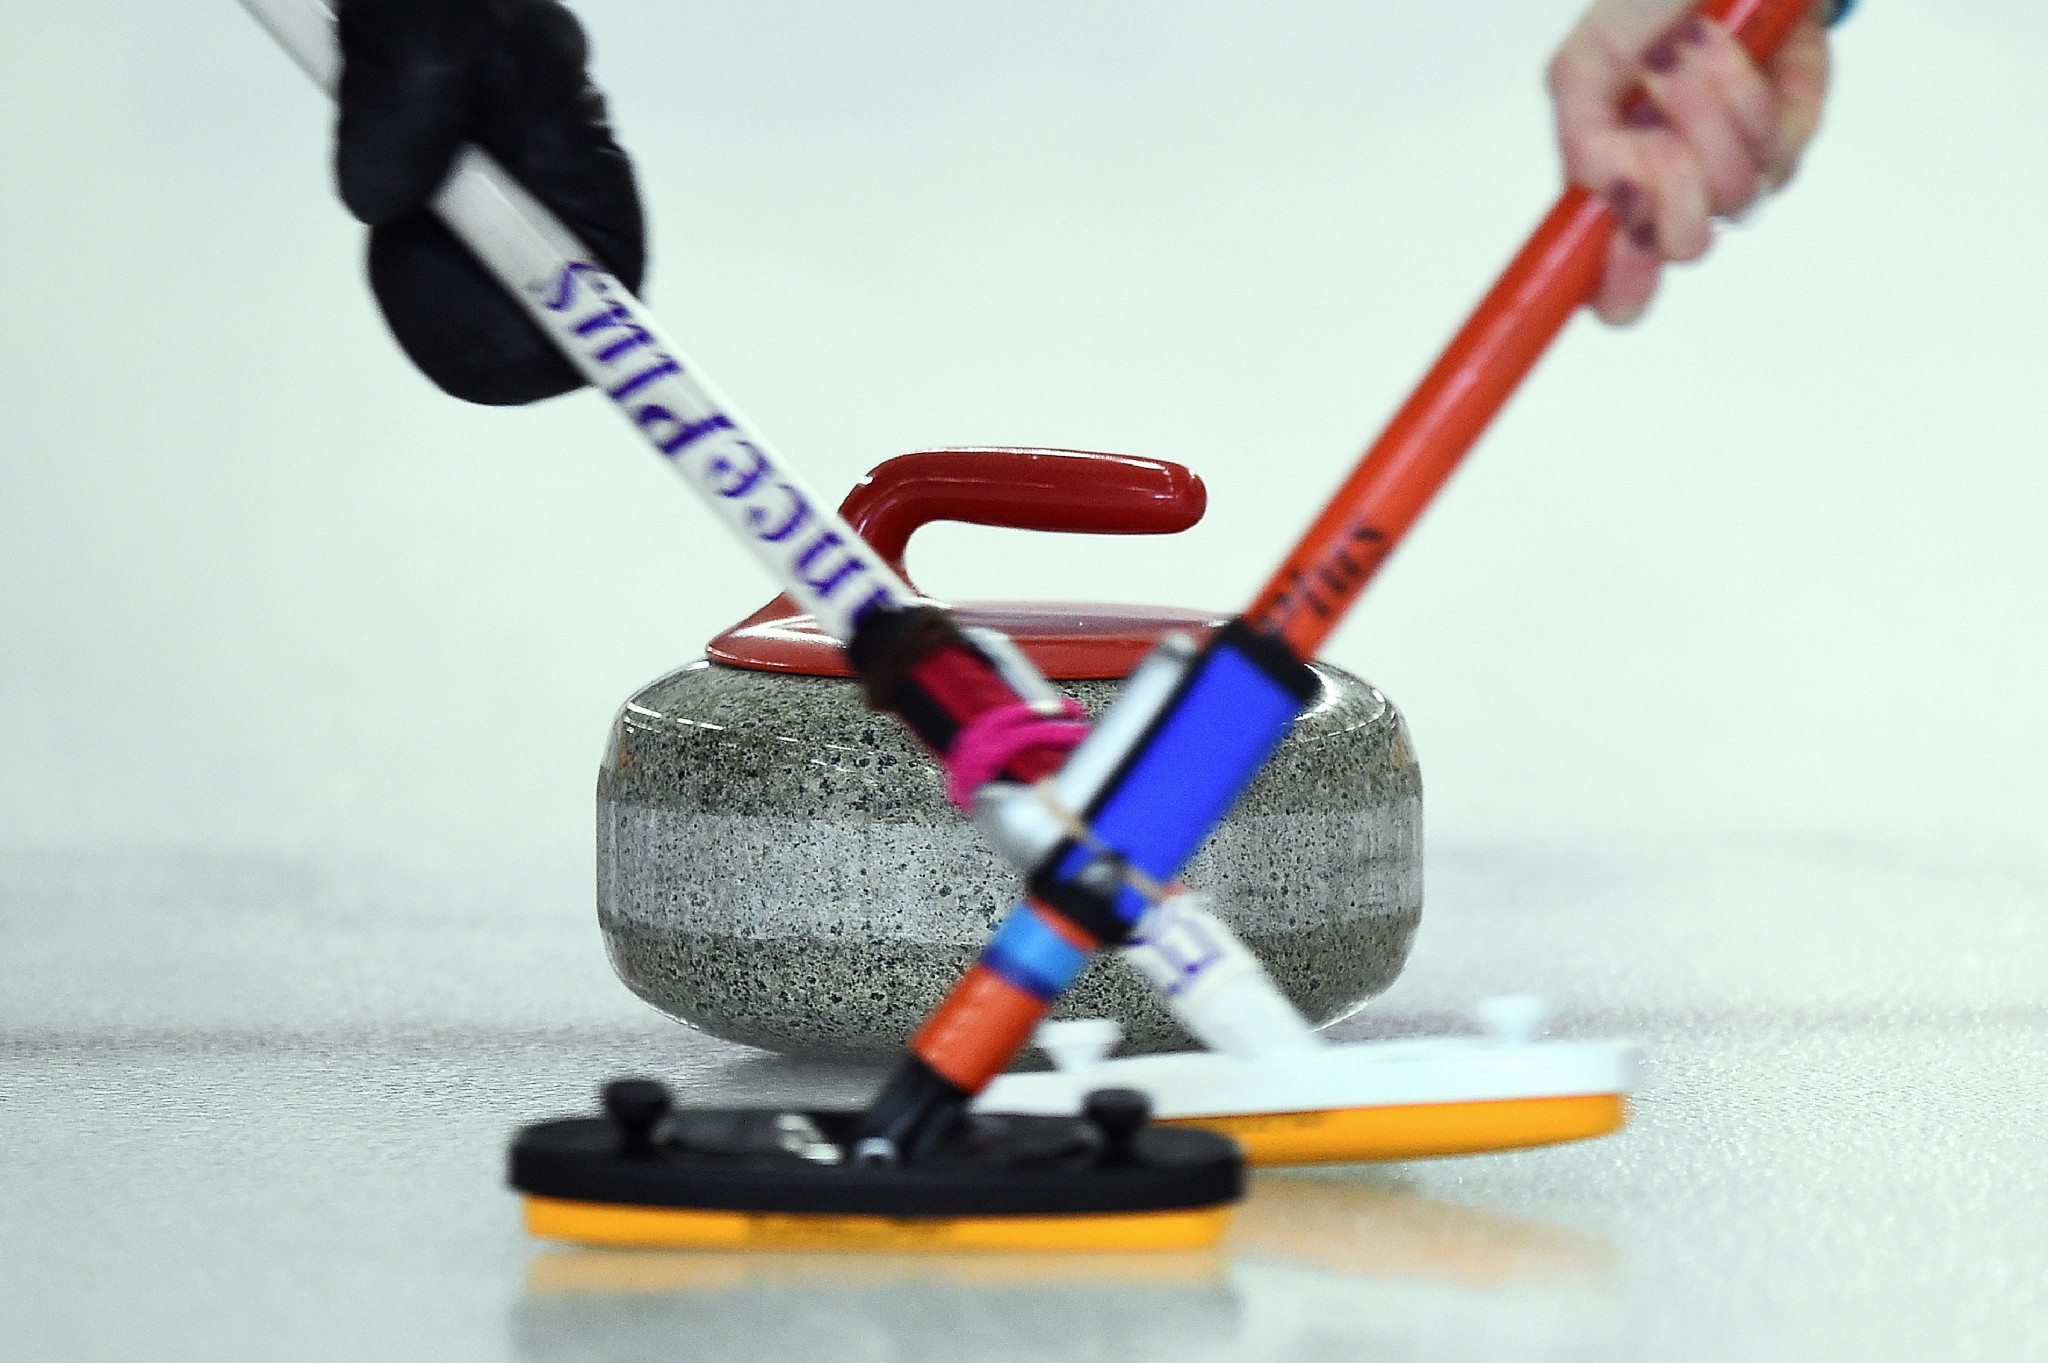 USA Curling College Championship and Tour to take place virtually